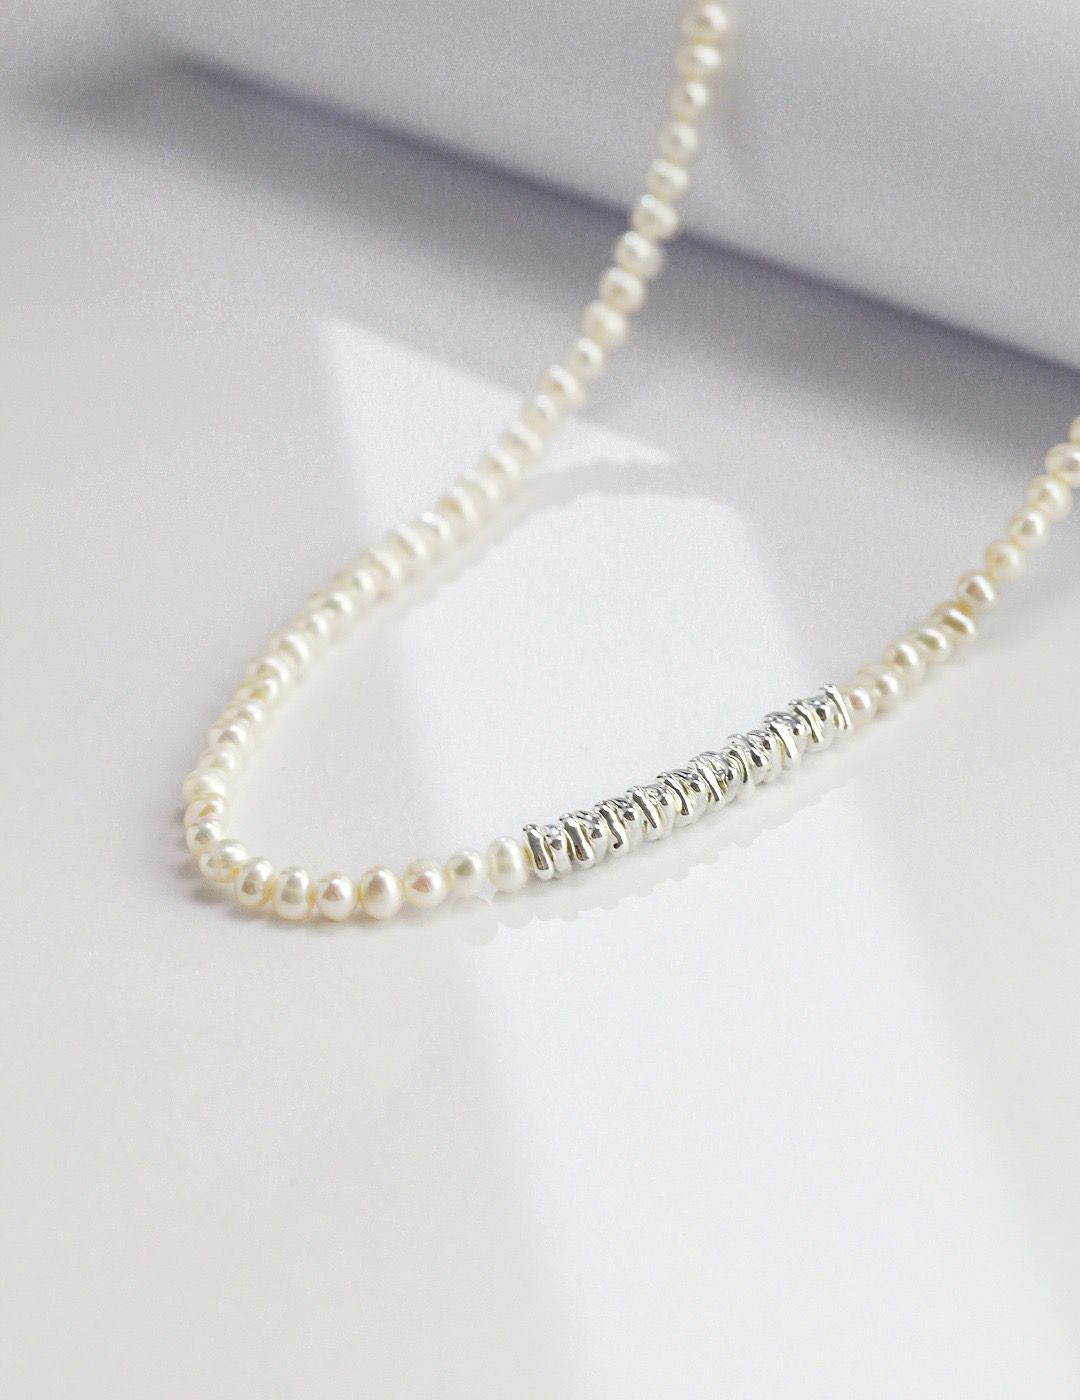 Freshwater Pearl Necklace with S925 Sterling Silver Chain - Classic Elegance and Modern Style